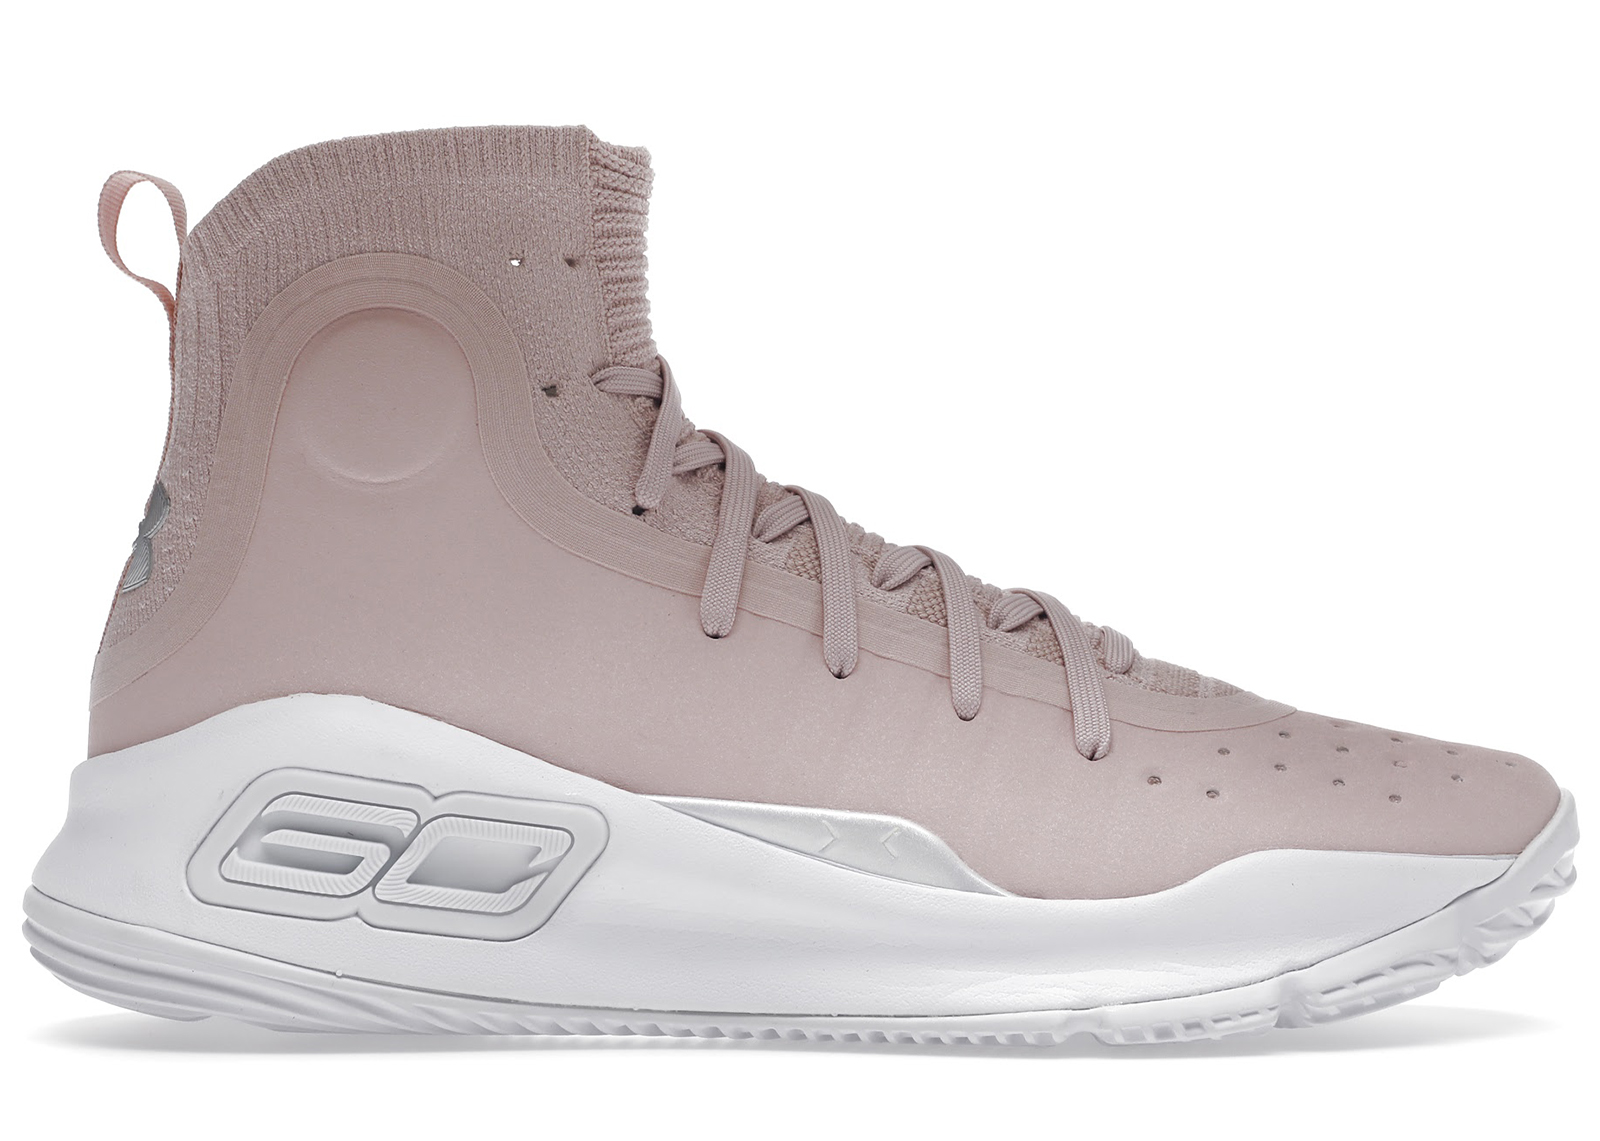 Under Armour Curry 4 Flushed Pink